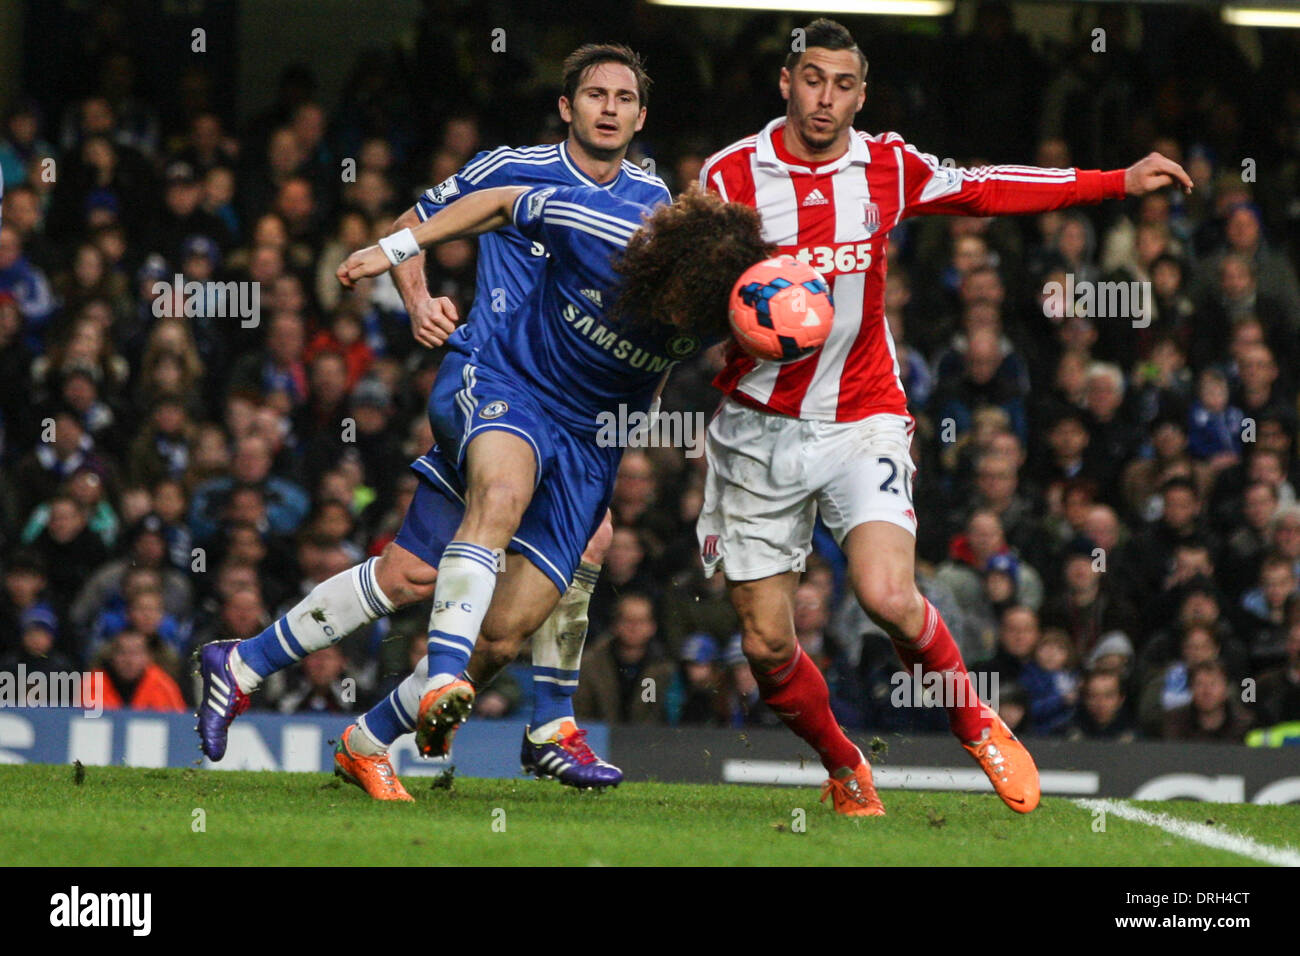 London, UK. 26th Jan, 2014. David LUIZ of Chelsea clears undre pressure from Geoff CAMERON of Stoke City during the FA Cup 4th Round match between Chelsea and Stoke City at Stamford Bridge. Final score: Chelsea 1-0 Stoke City. Credit:  Action Plus Sports/Alamy Live News Stock Photo